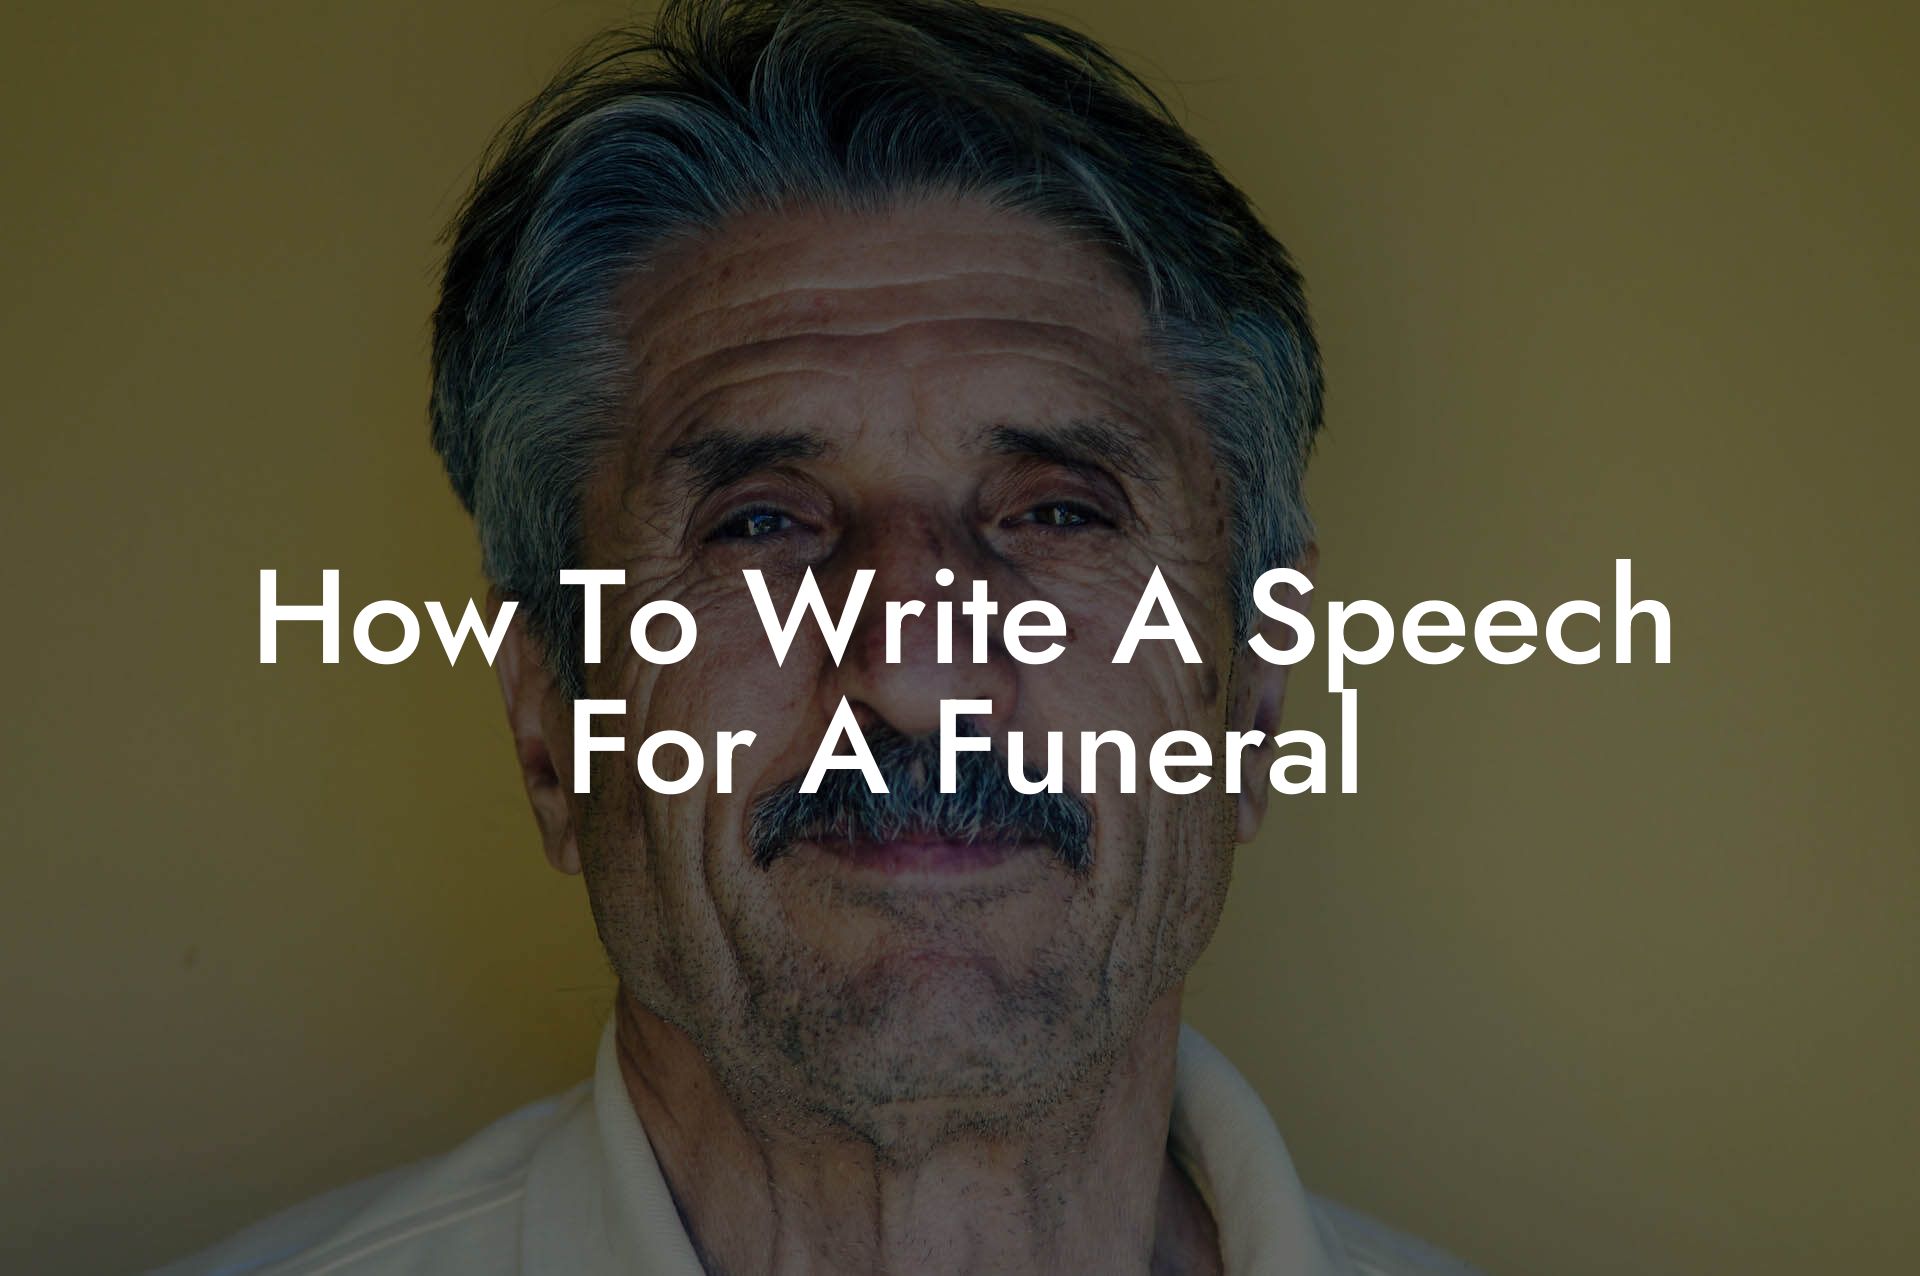 How To Write A Speech For A Funeral